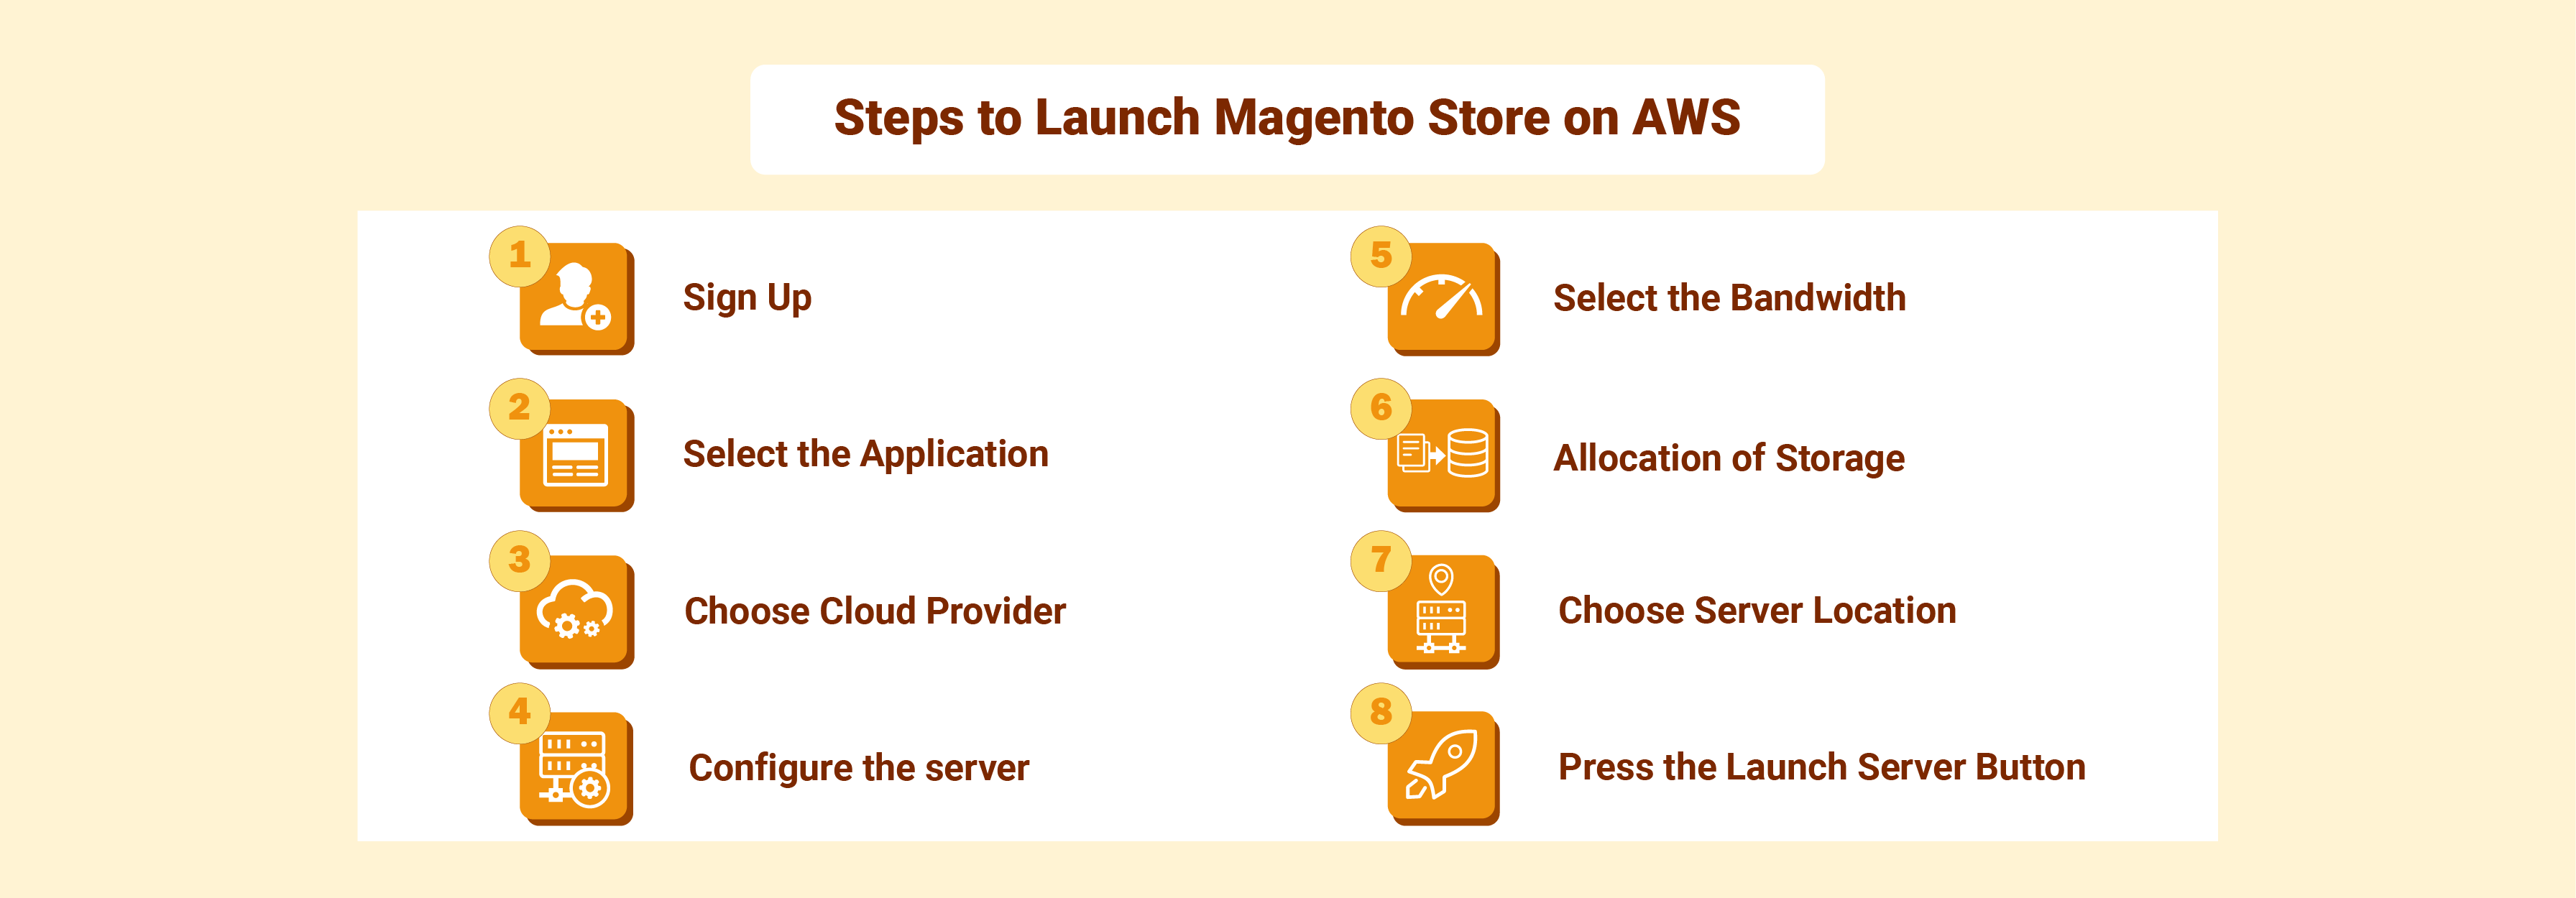 Steps to Launch Magento Store on AWS